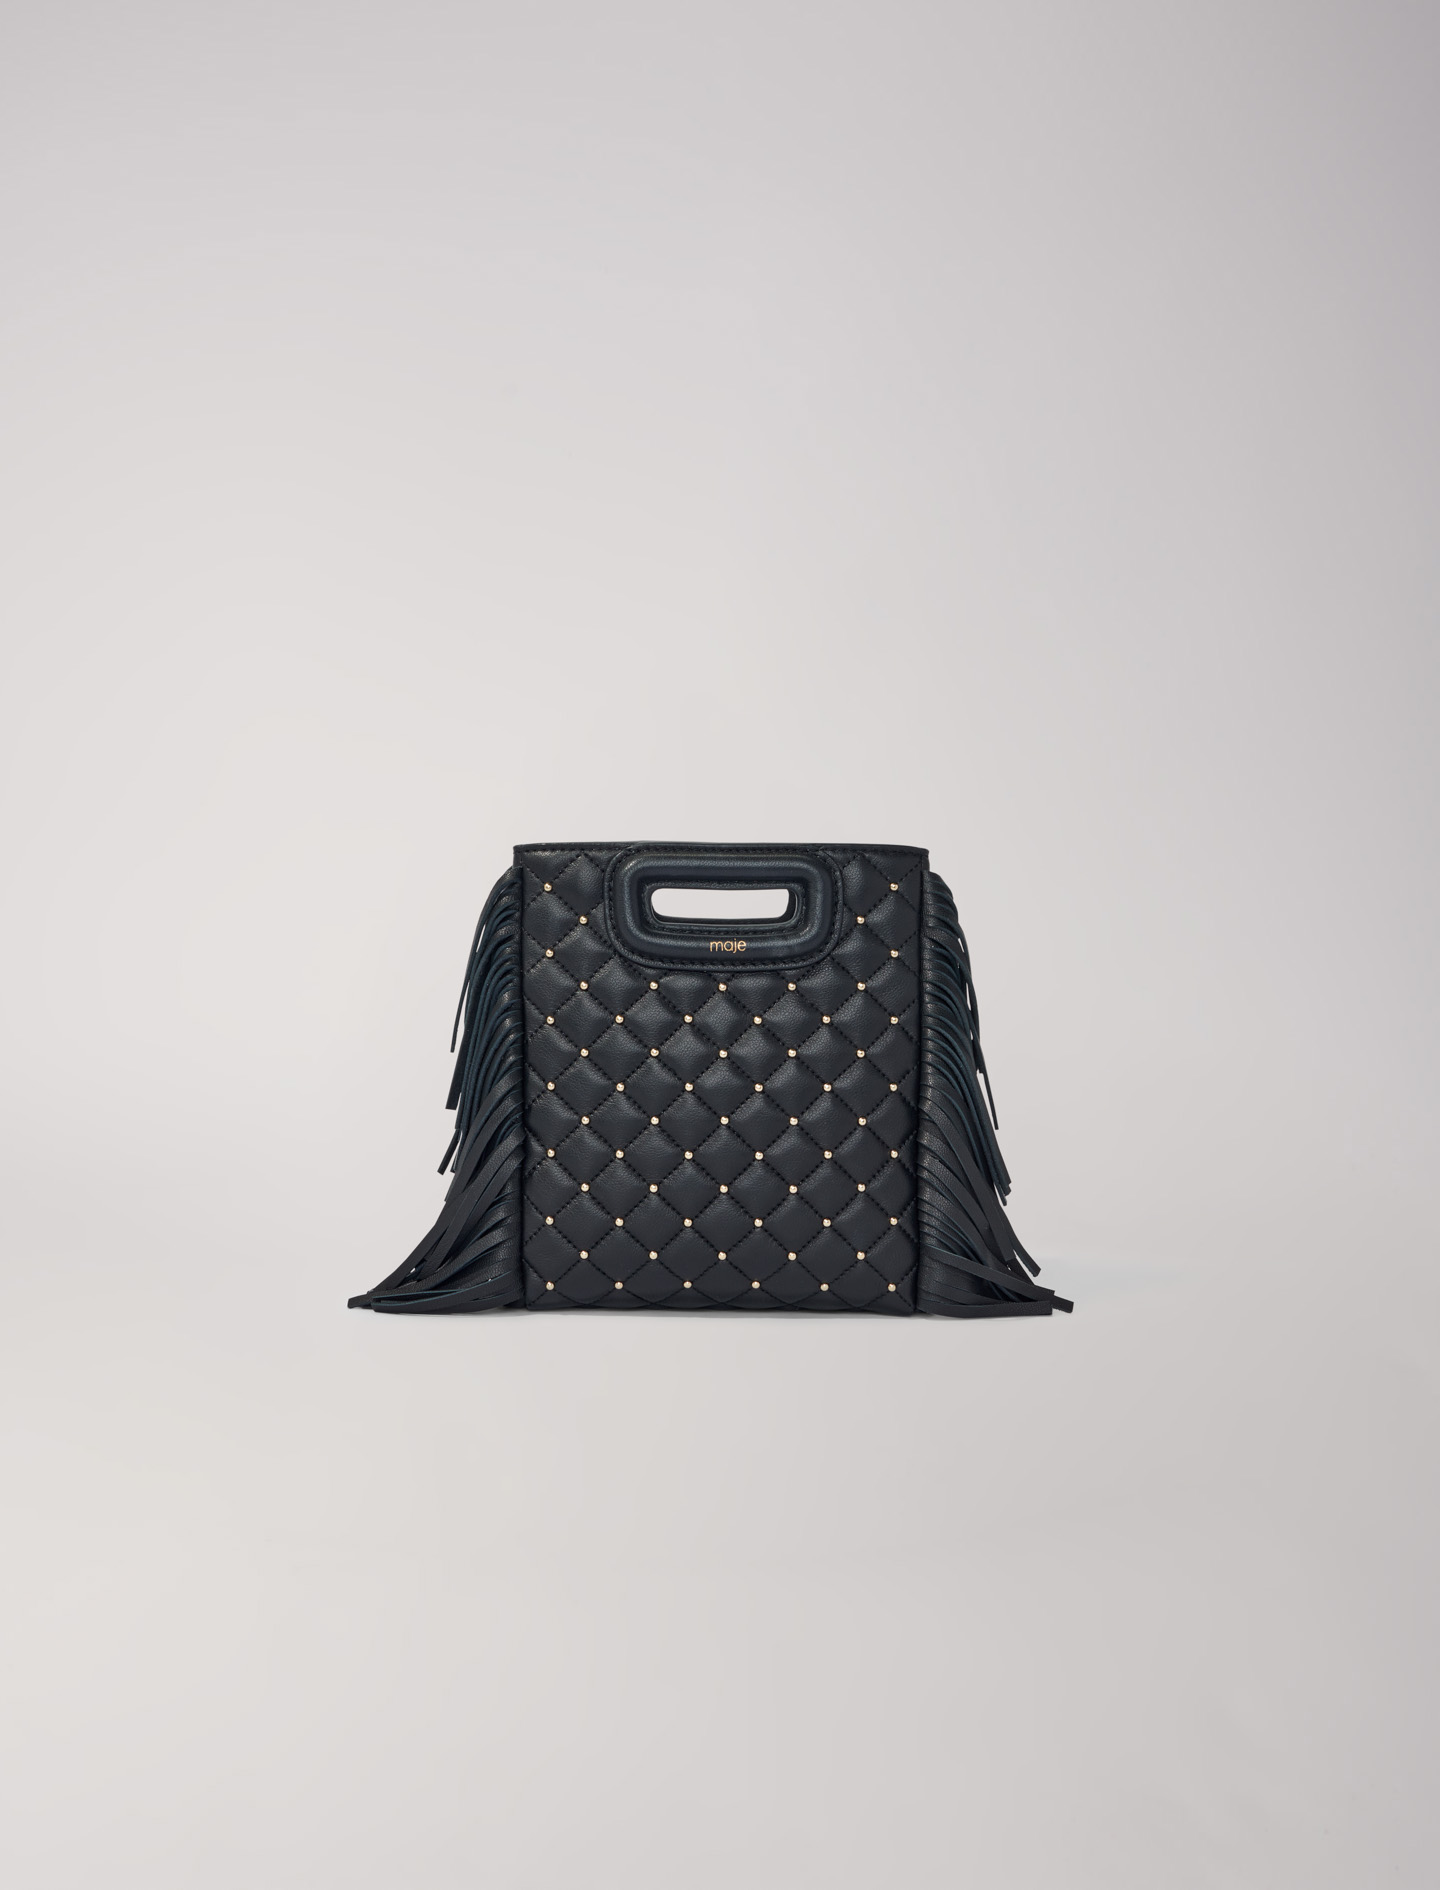 Maje Woman's polyester Rivet: Studded M quilted leather mini bag for Spring/Summer, in color Black / Black